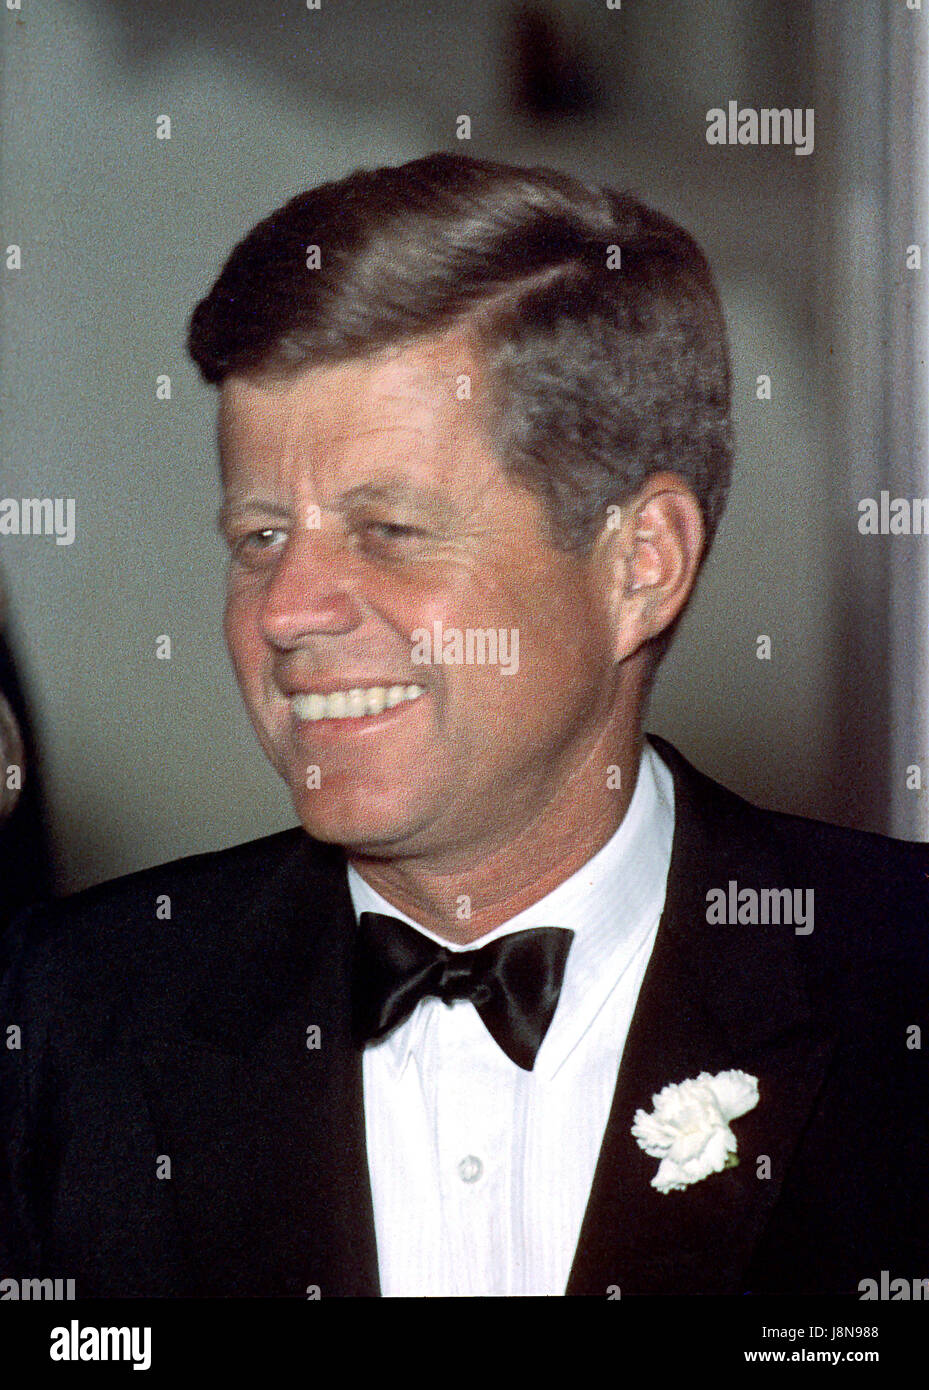 Undated File Photo from 1963 of United States President John F. Kennedy at a formal event at the White House in Washington, D.C. .Credit: Arnie Sachs - CNP /MediaPunch Stock Photo